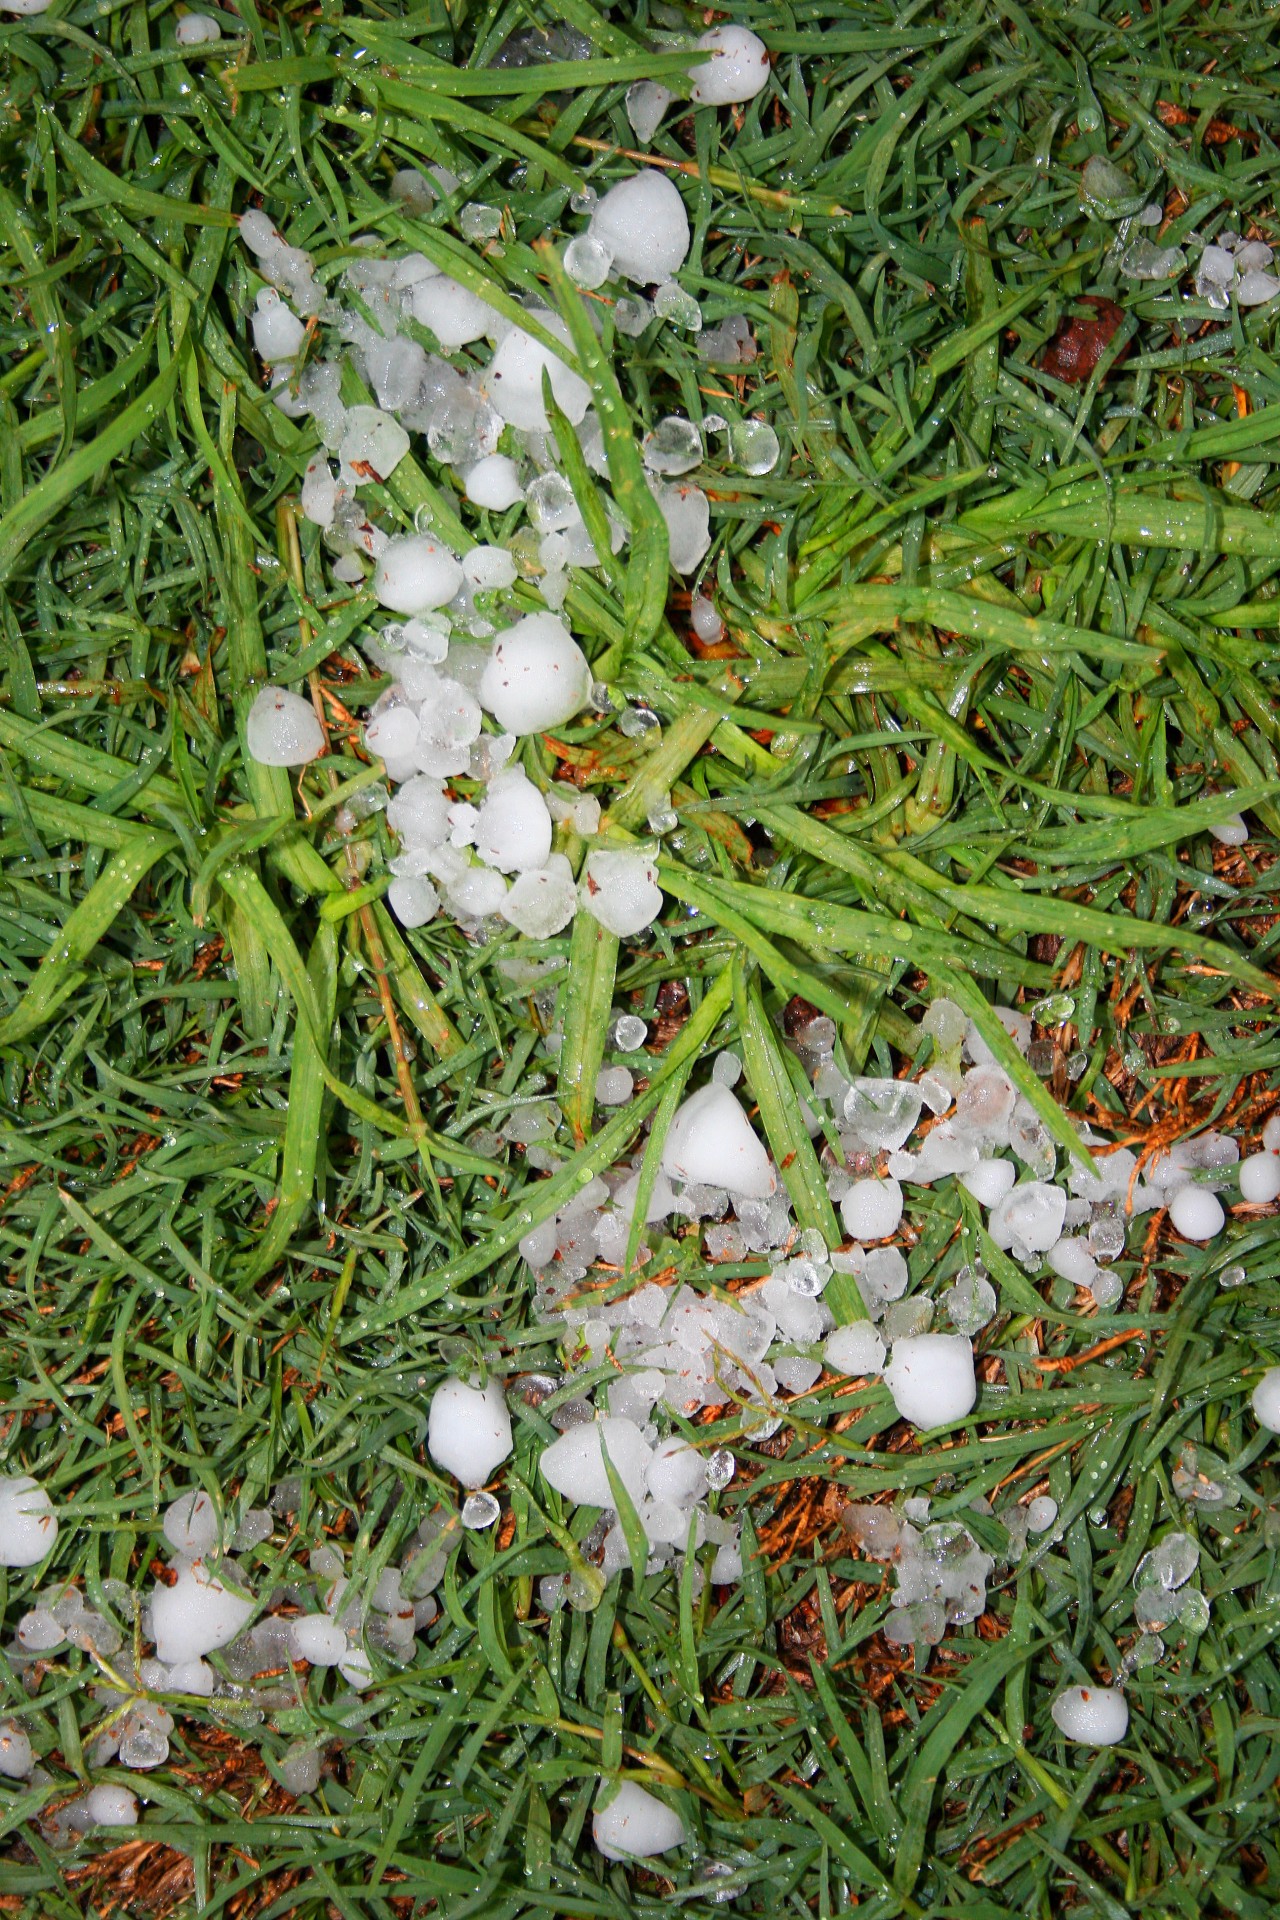 Patch Of Hail On Lawn